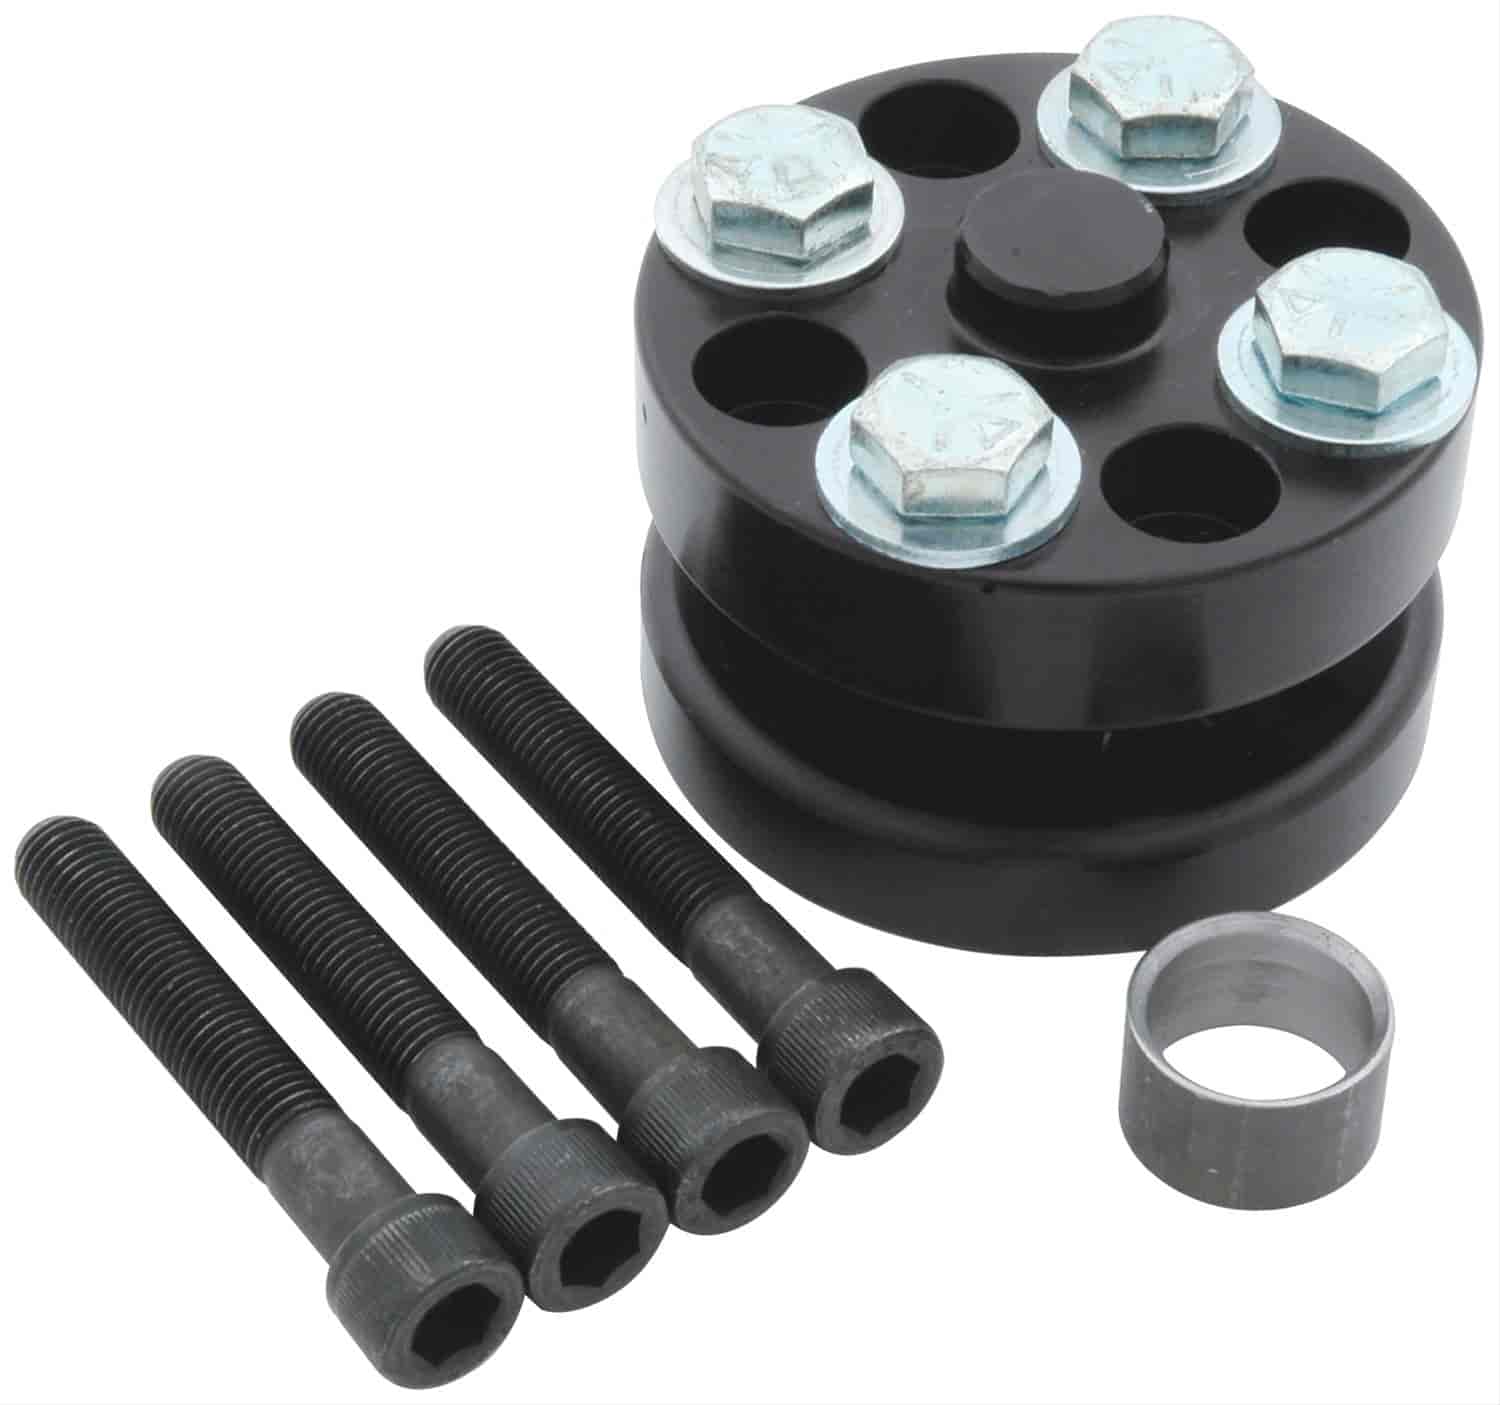 Aluminum Fan Spacer Kit 1-1/2" Spaced *Note: Spacers work with 1-3/4" bolt circle flanges only.